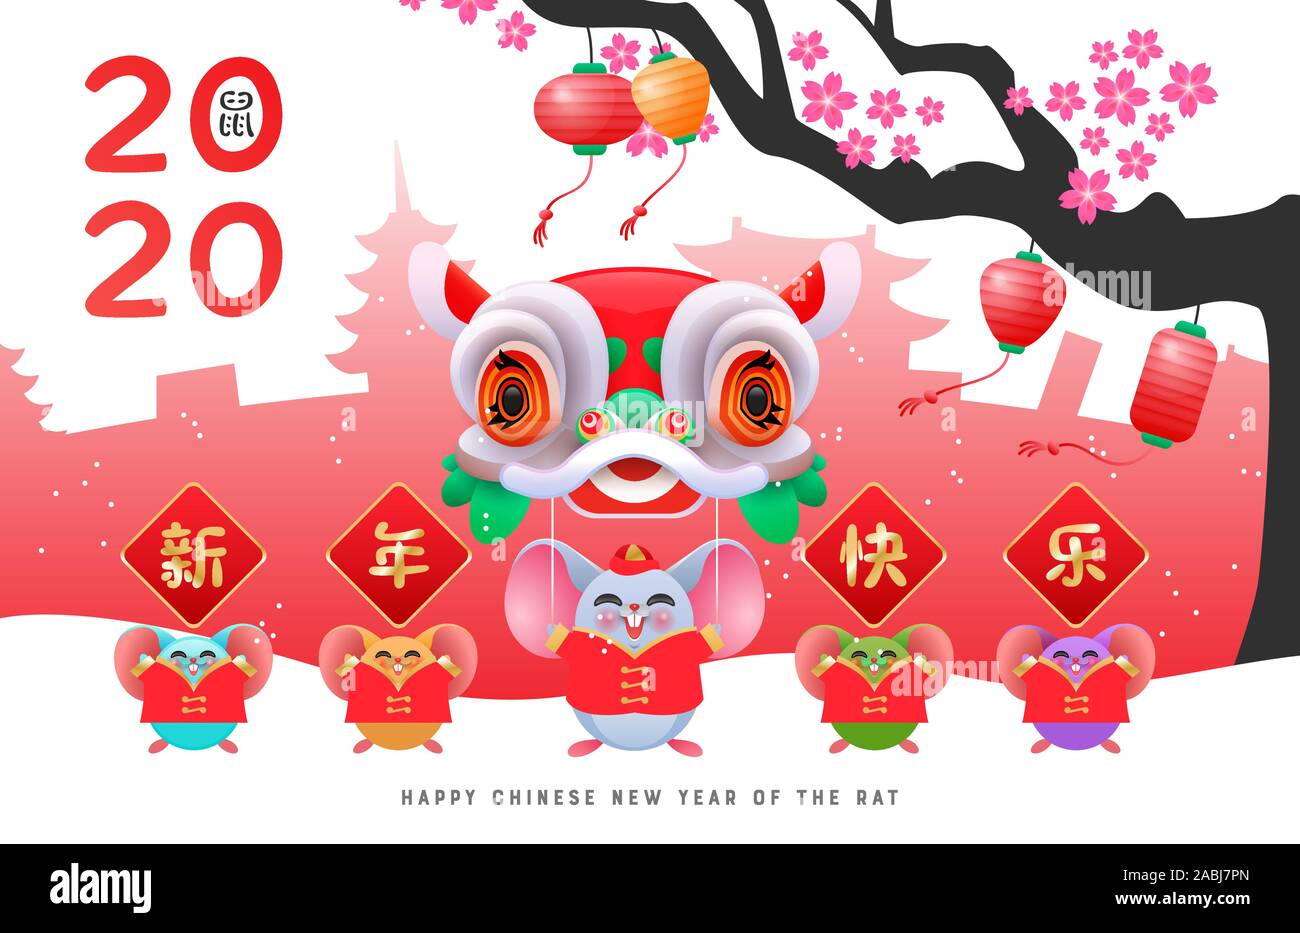 Chinese New Year 2020 greeting card of little colorful rats in diverse colors with traditional costume, plum blossom tree and lion dance dragon. Calli Stock Vector